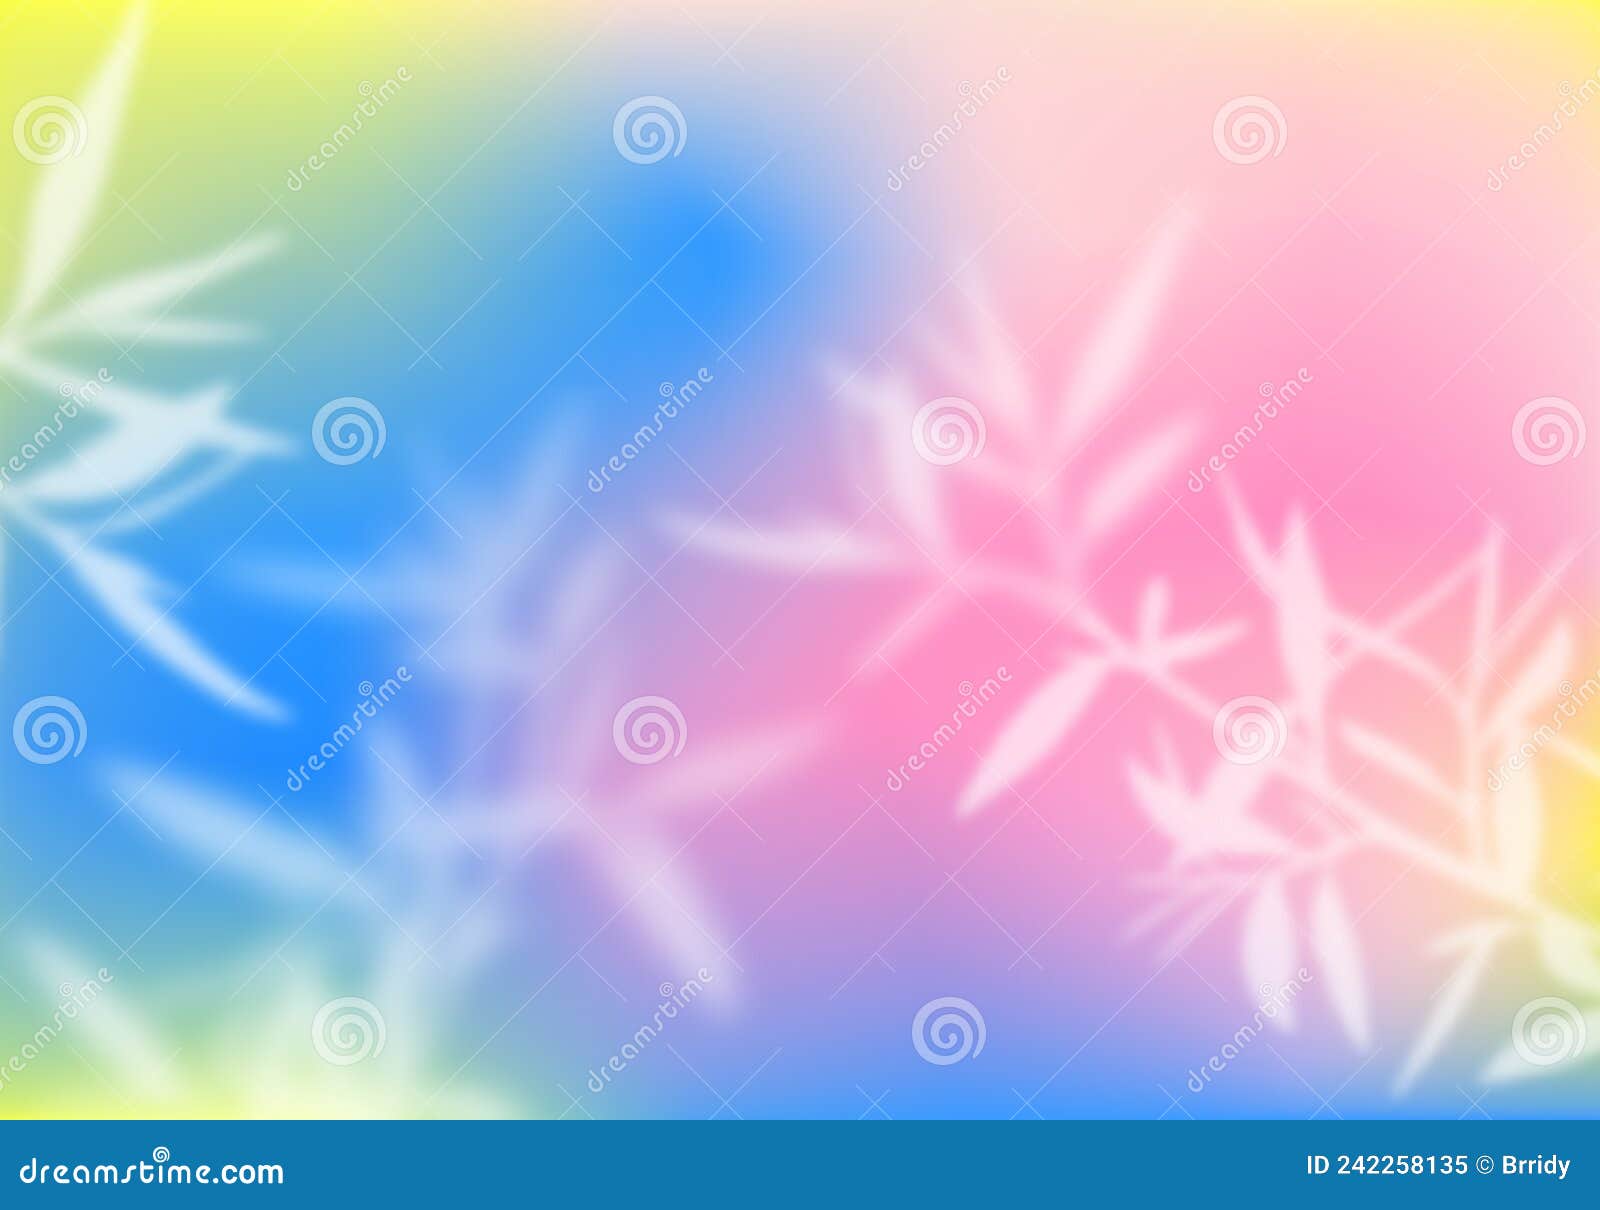 pastel holographic gradient background with branches and leaves. abstract bg with blurred tree leaves overlay